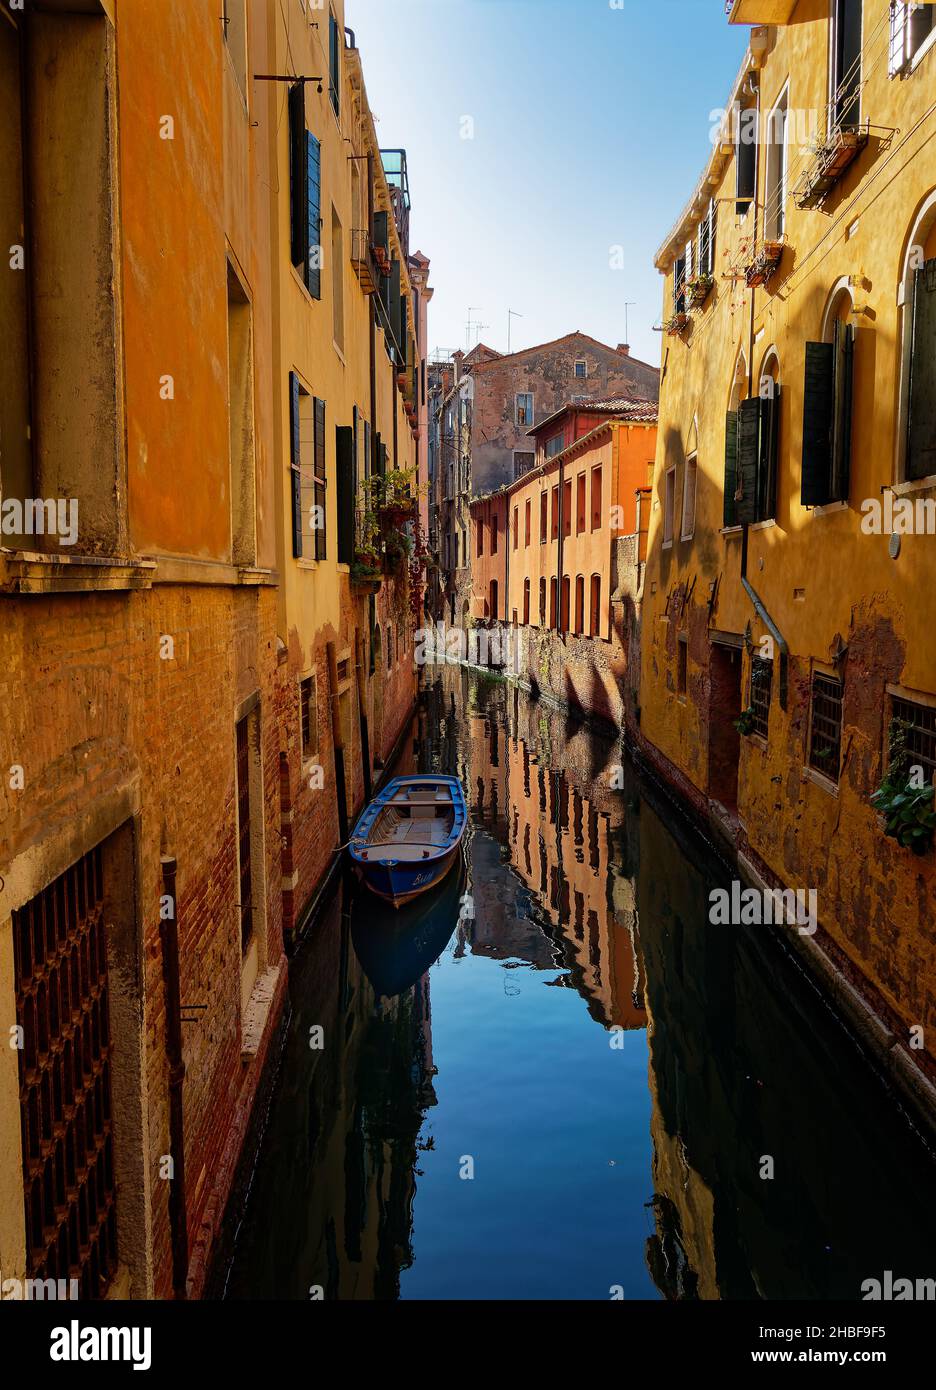 Narrow street in Venezia historical town with canal and boat, blue water and old yellow buildings in Italy. Stock Photo